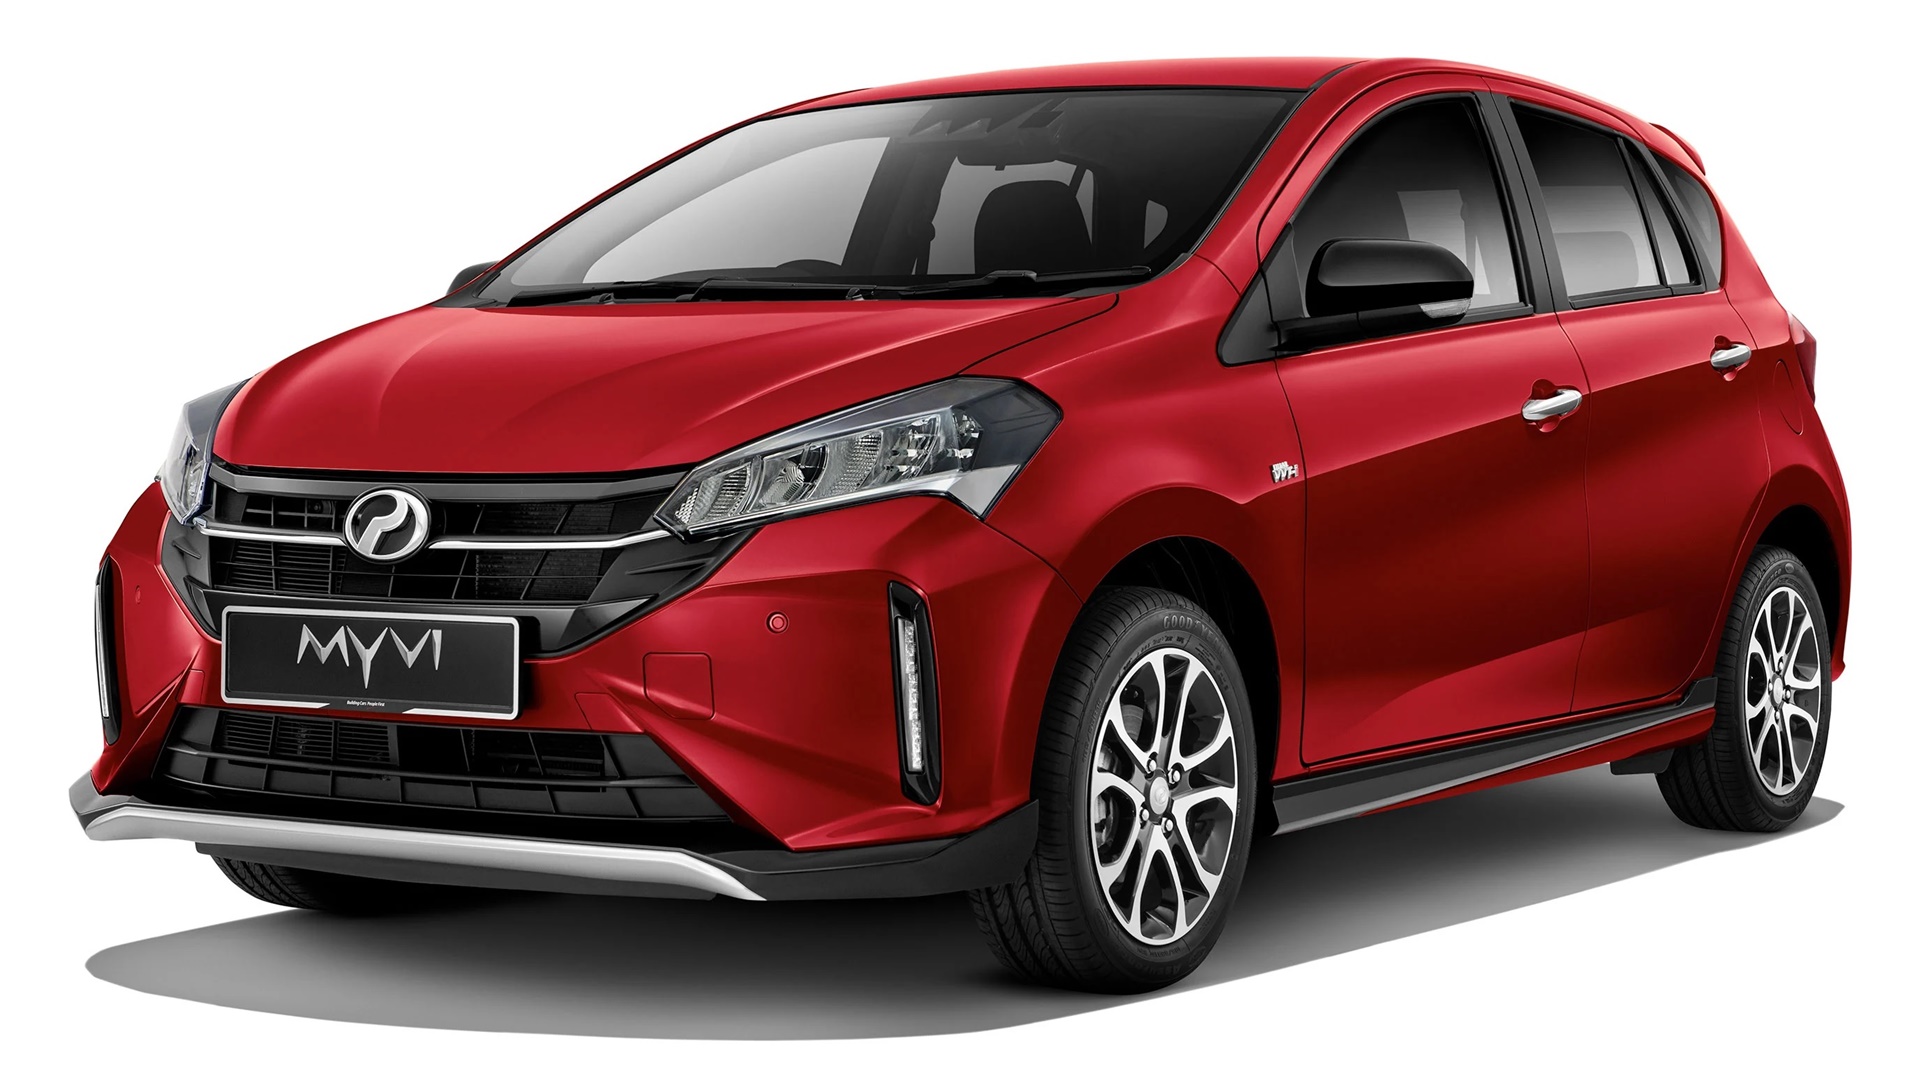 2022 Perodua Myvi Facelift Received 4,303 Bookings in 9 Days – 6,000